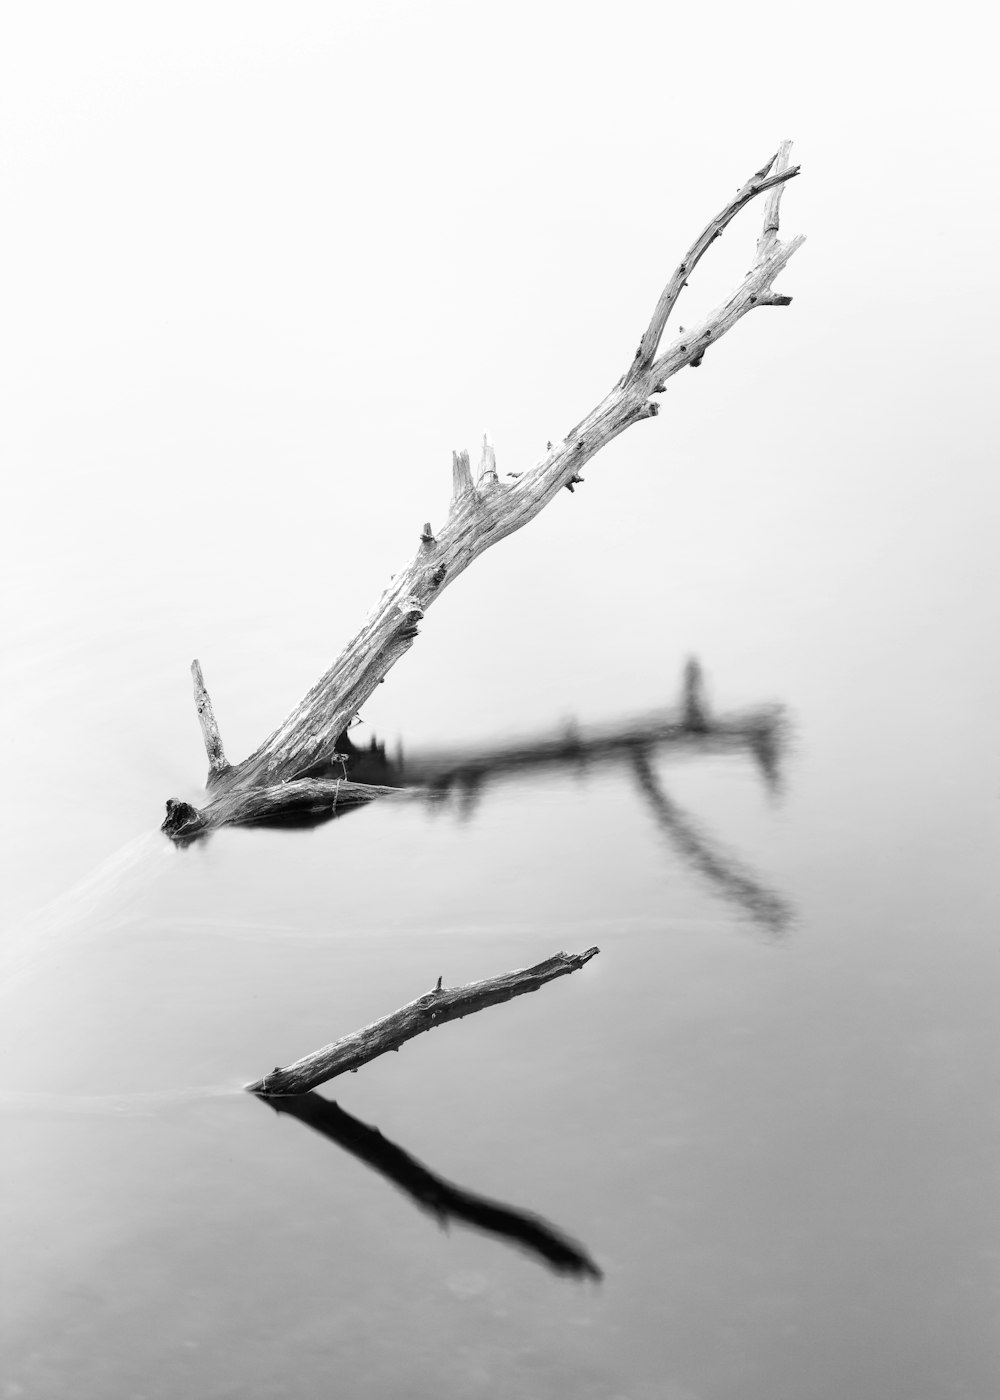 a tree branch floating in a body of water